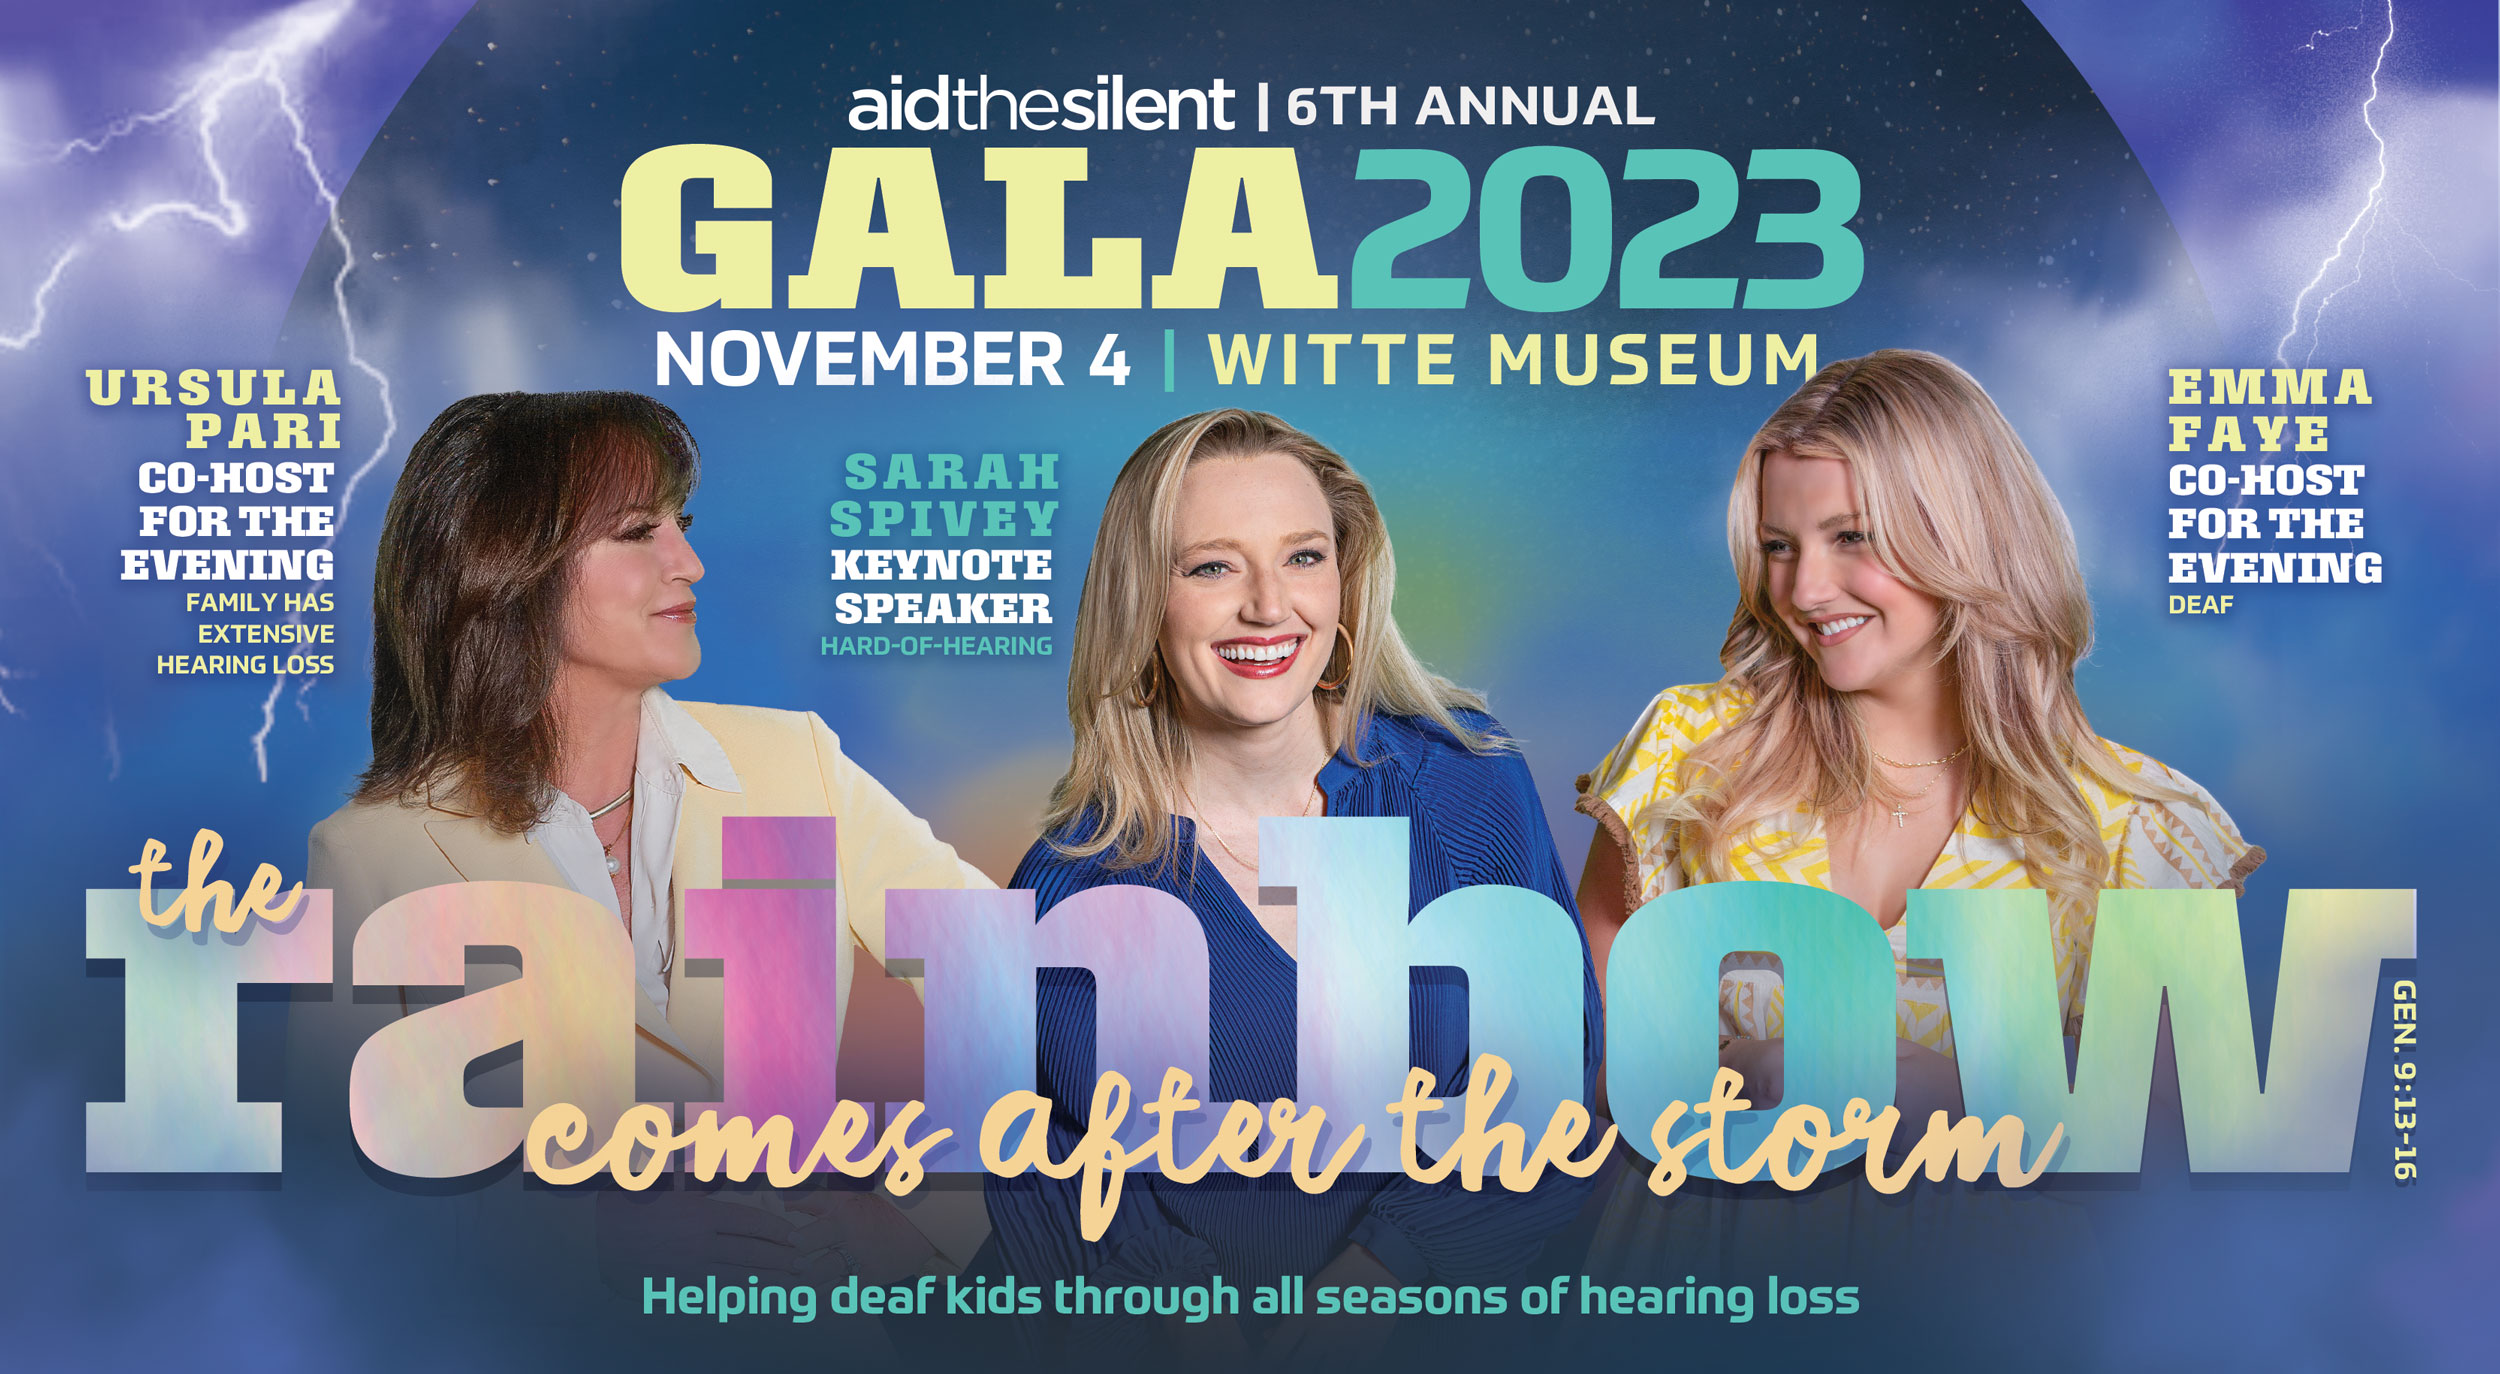 Aid The Silent Gala 2023, November 4 - Witte Museum